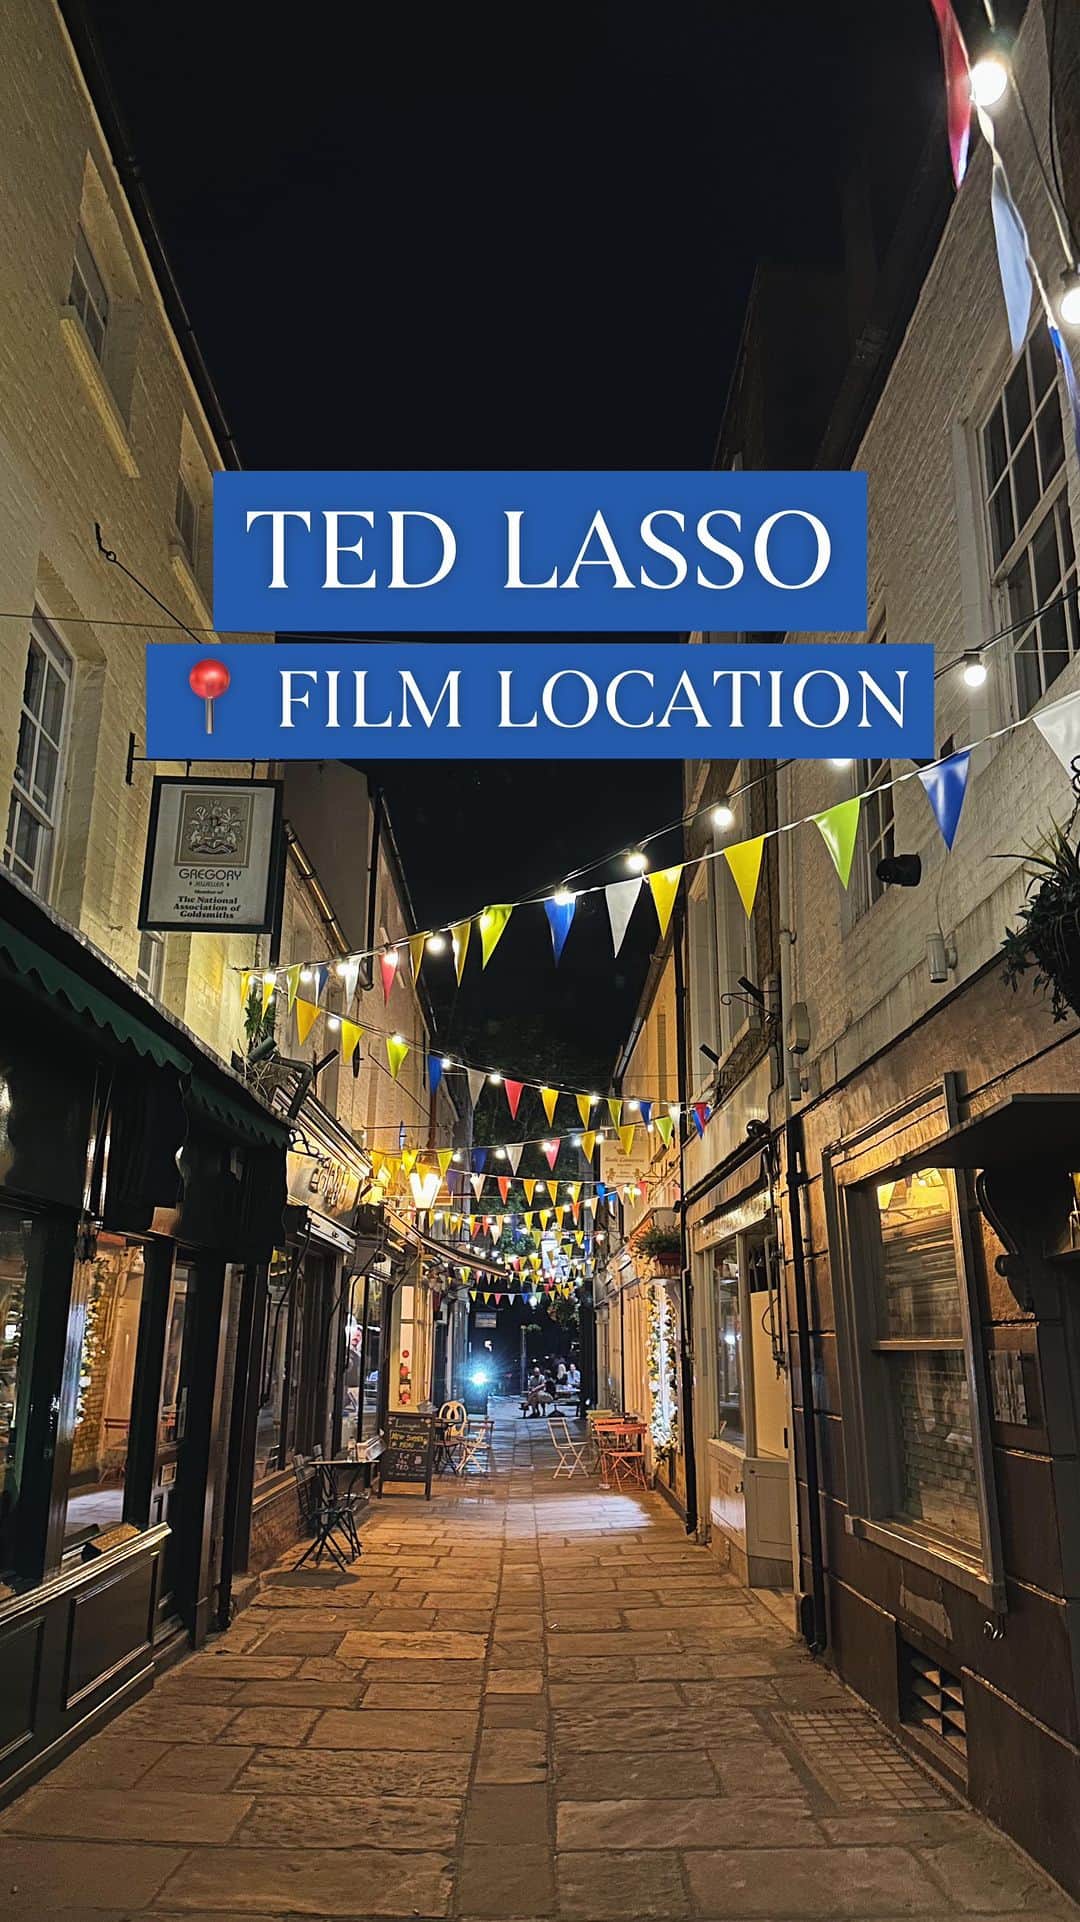 @LONDON | TAG #THISISLONDONのインスタグラム：「📍 Film Location. Ever visited the set of #TedLasso in #Richmond? 🙌🏼 Find Ted Lasso’s Flat – 9½ Paved Court, in on of Richmond’s quintessential alleyways. In reality it was shot at No.11. You can find Ted’s famous shortbread cookies on sale, along with memorabilia. Just don’t expect to find Ted inside… the real flat was shot at West London film studios. You can grab a pint 🍺 at the Prince’s Head Pub which was The Crown & Anchor in the series. Very cool! We’ll leave you with a few thoughts from the man himself…  “Little tip for y’all. Fries are called chips. Chips are called crisps. And bangers aren’t great songs, but they do make you feel like dancing because they’re so darn tasty.” – Ted Lasso 😆  🎥 @MrLondon  ___________________________________________  #thisislondon #lovelondon #london #londra #londonlife #londres #uk #visitlondon #british #🇬🇧 #whattodoinlondon #londonreviewed」